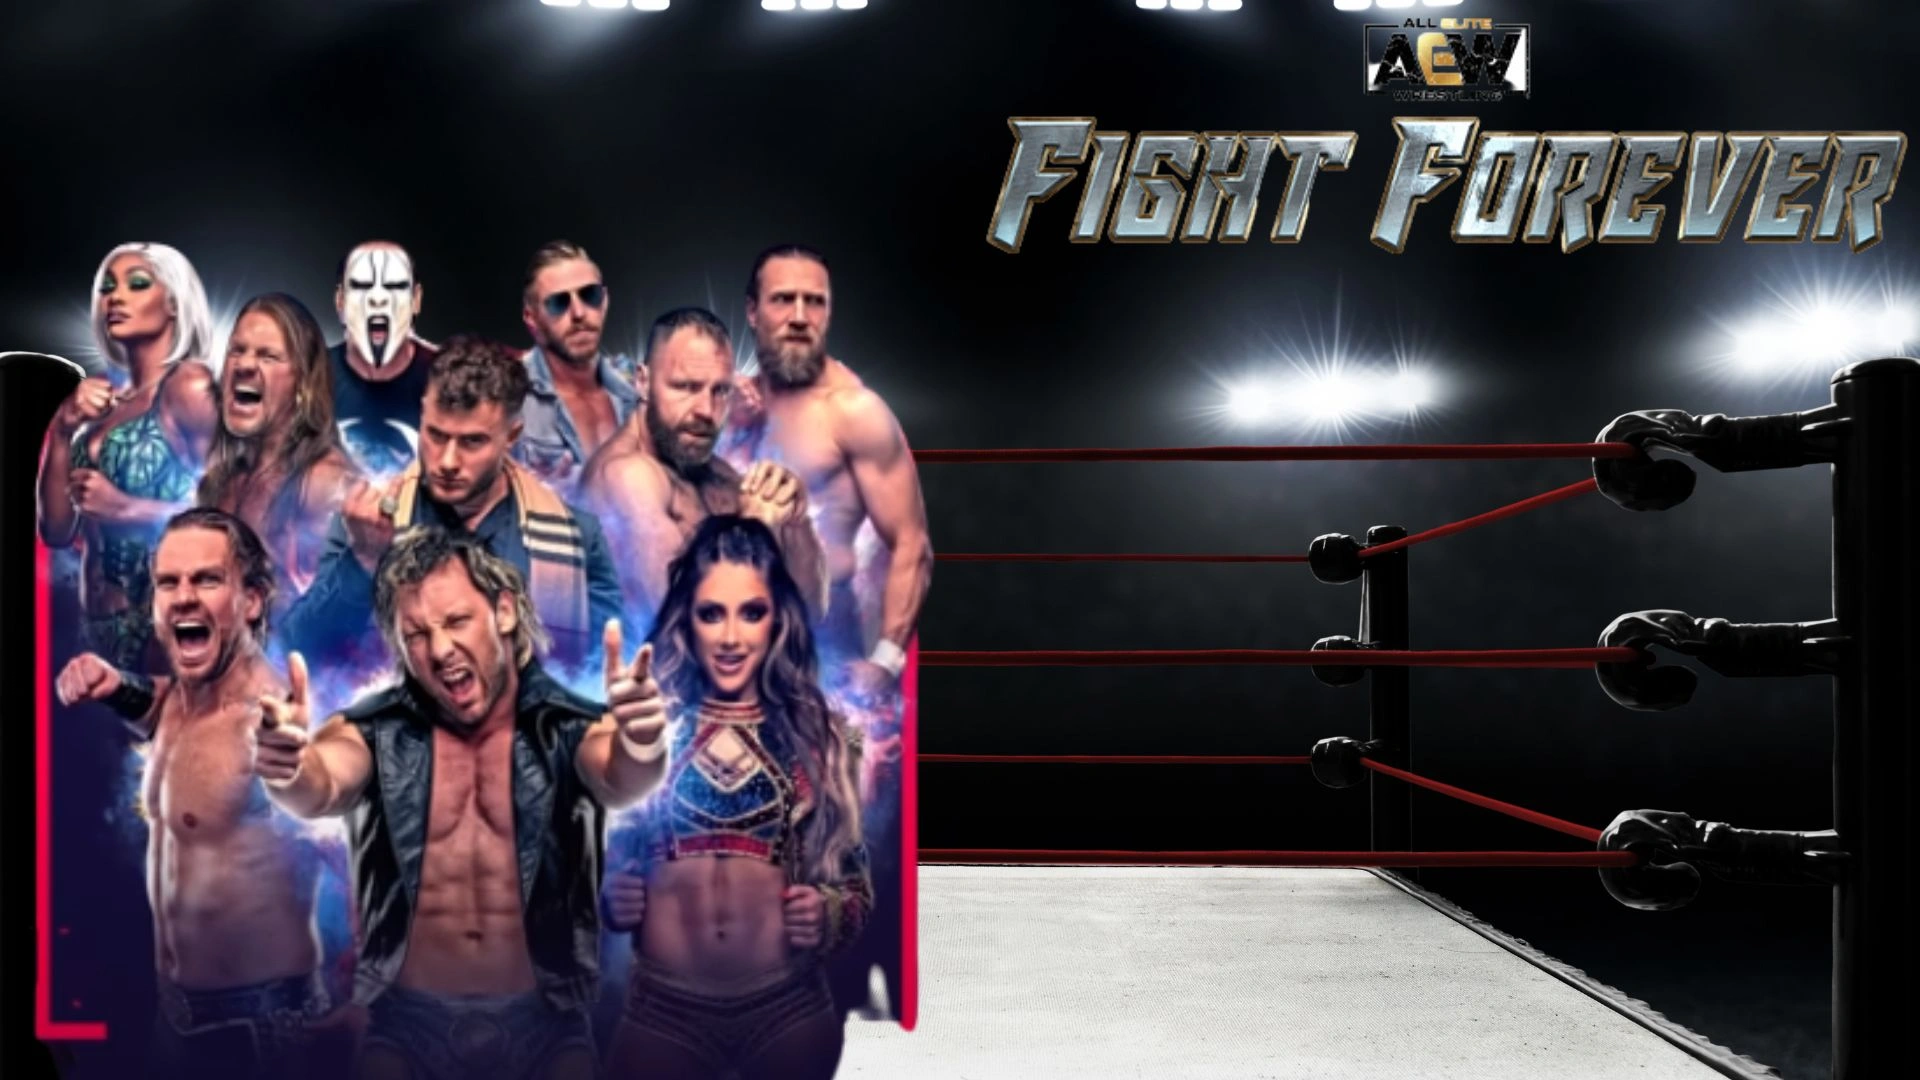 AEW: Fight Forever Parents Guide and Age Rating (2023)